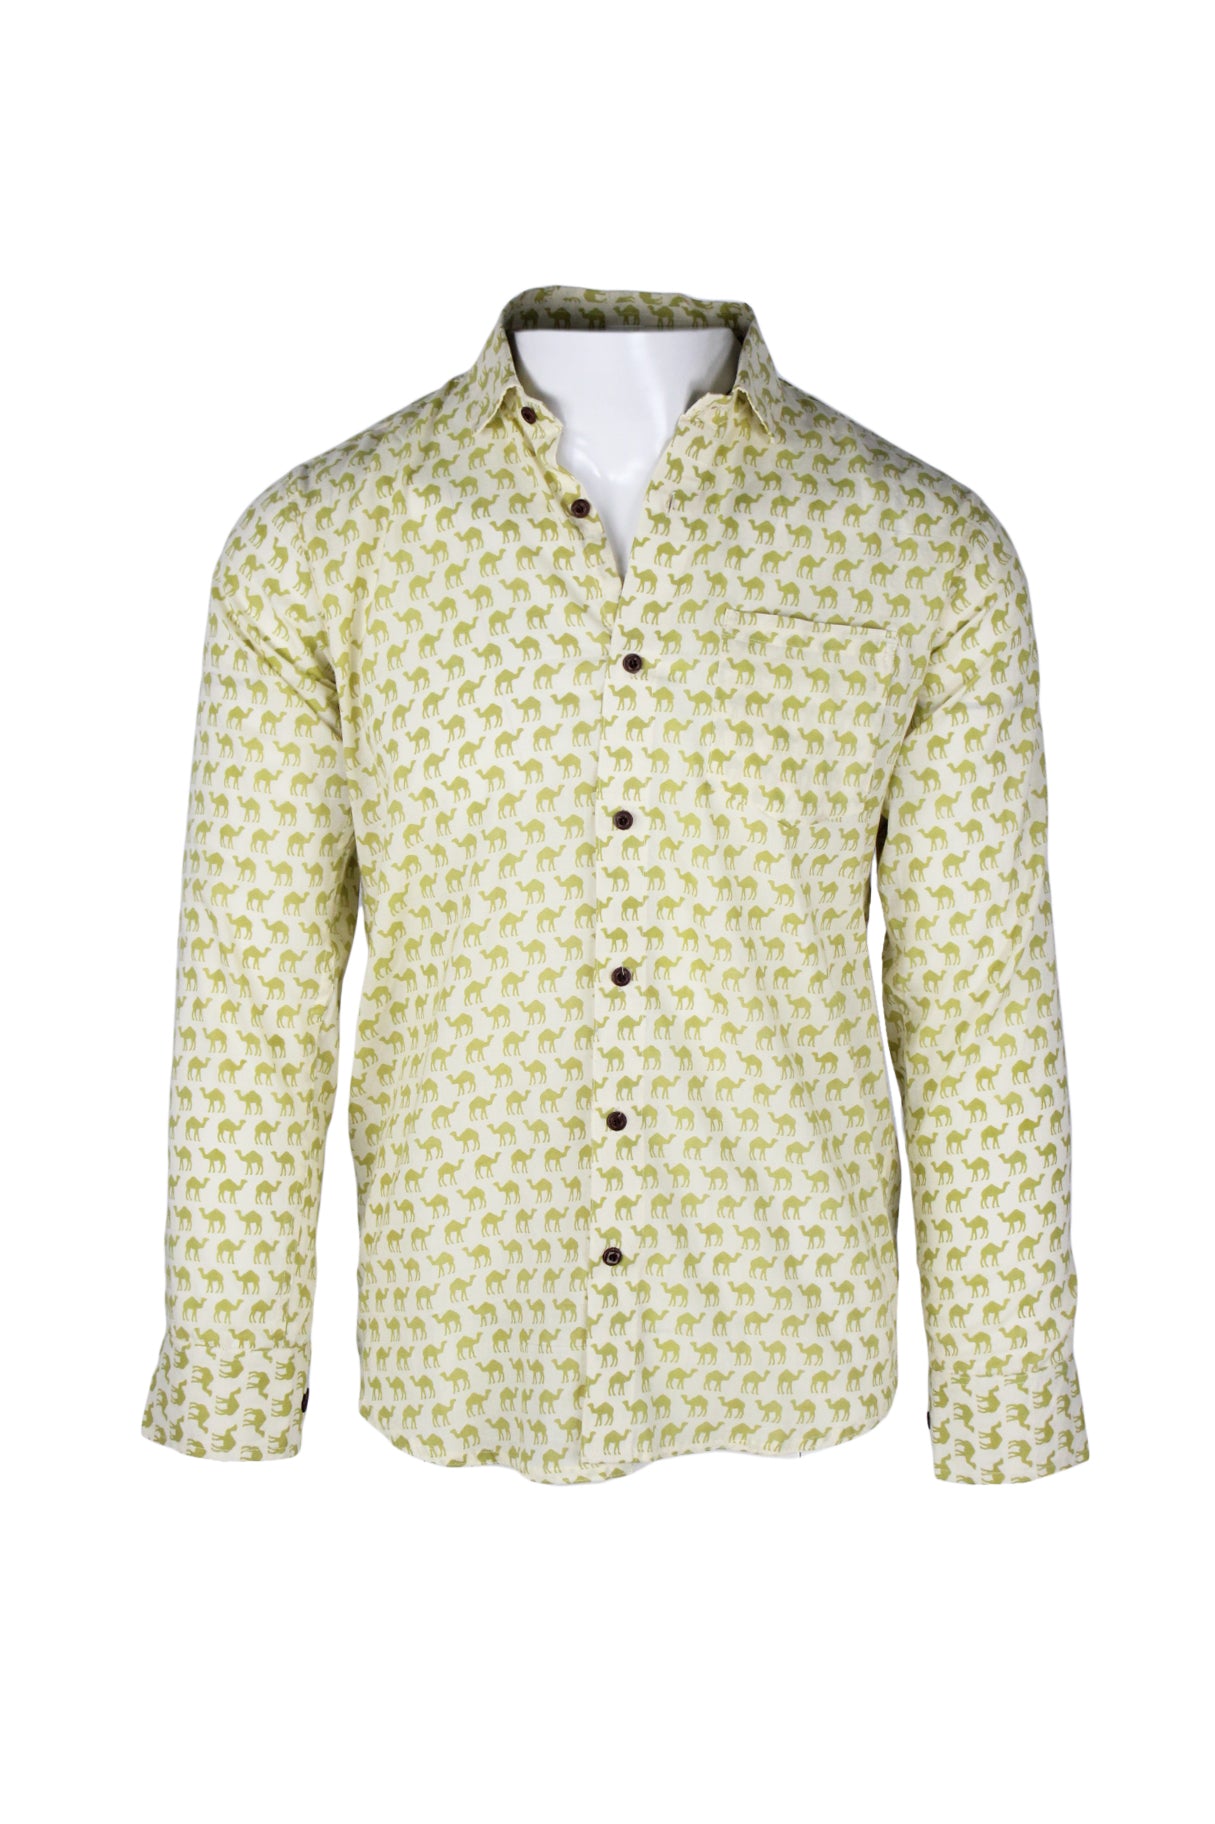 front view of unlabeled off-white/avocado long sleeve button up shirt. features camel pattern throughout, pocket at left breast, and buttons at cuffs. 